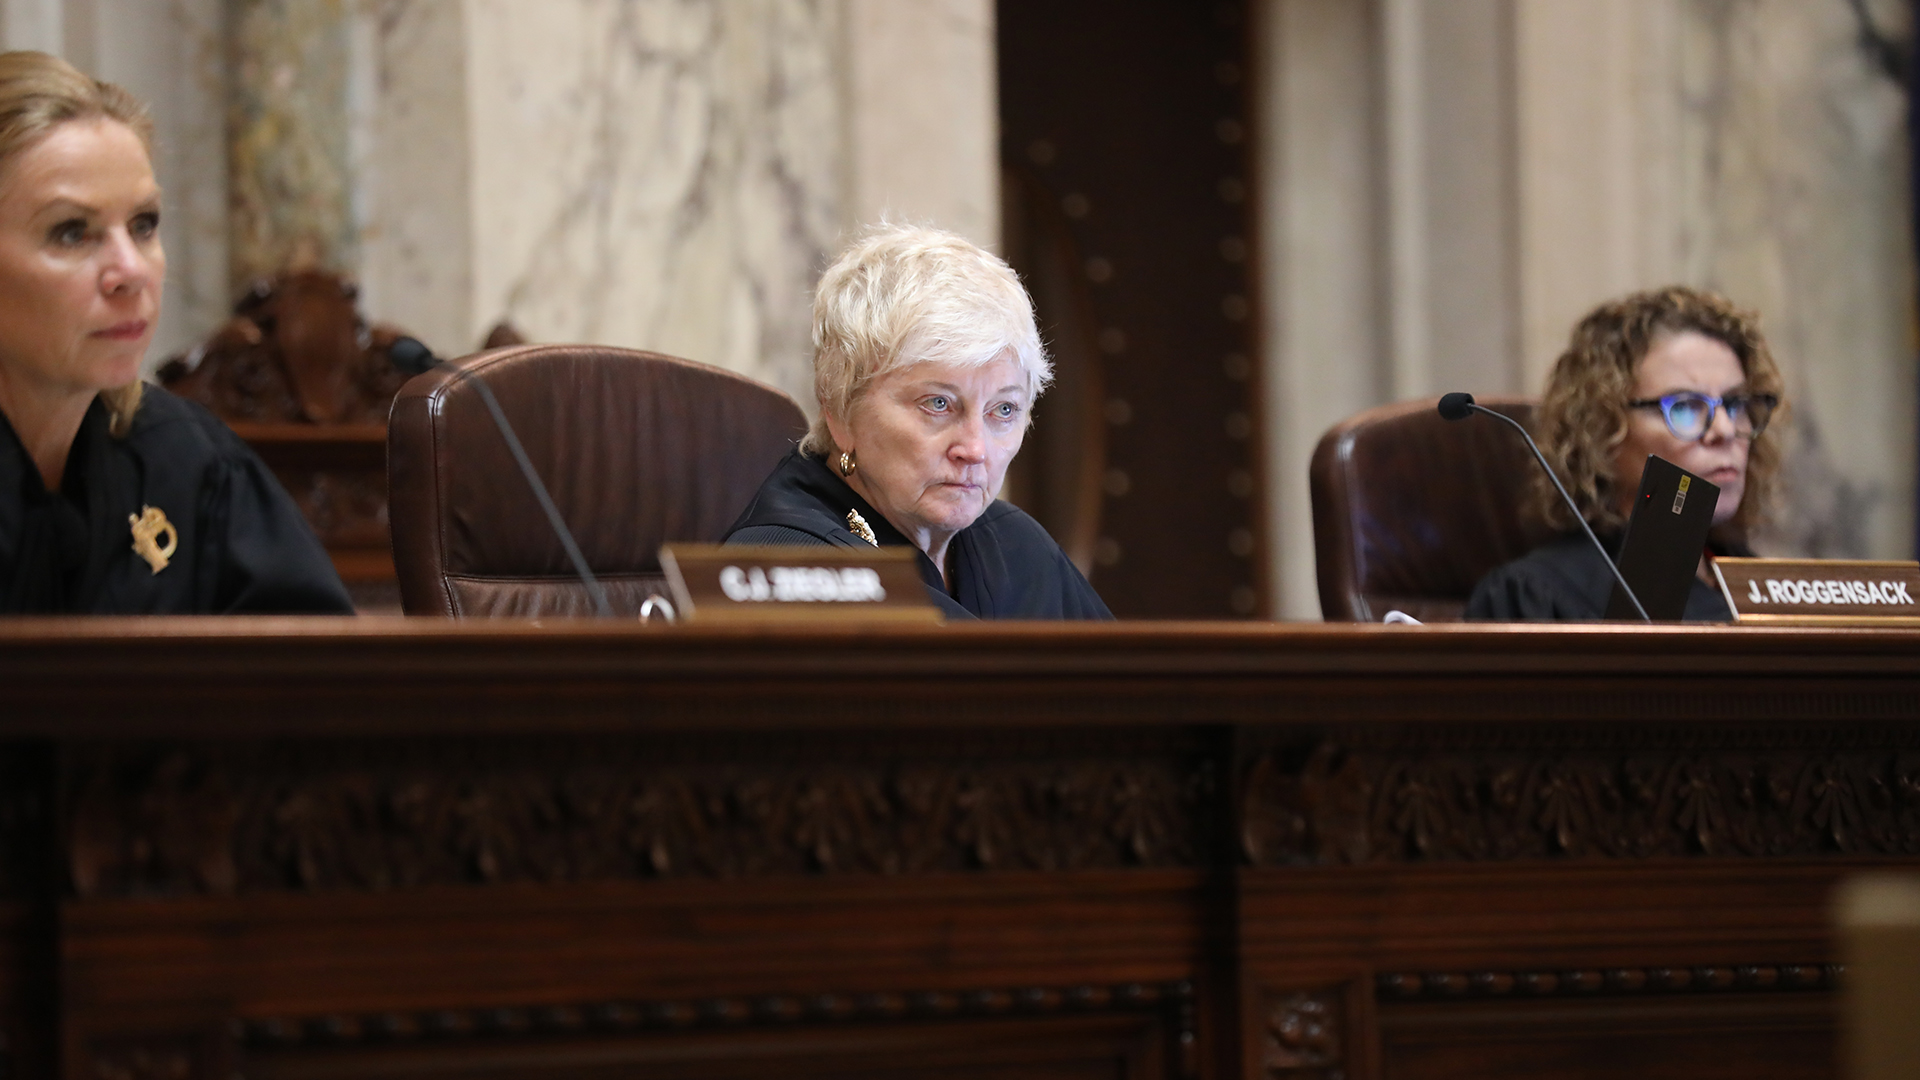 Patience Roggensack sits in a chair behind a judicial bench and listens with two other justices seated on either side of her, in a room with marble walls.